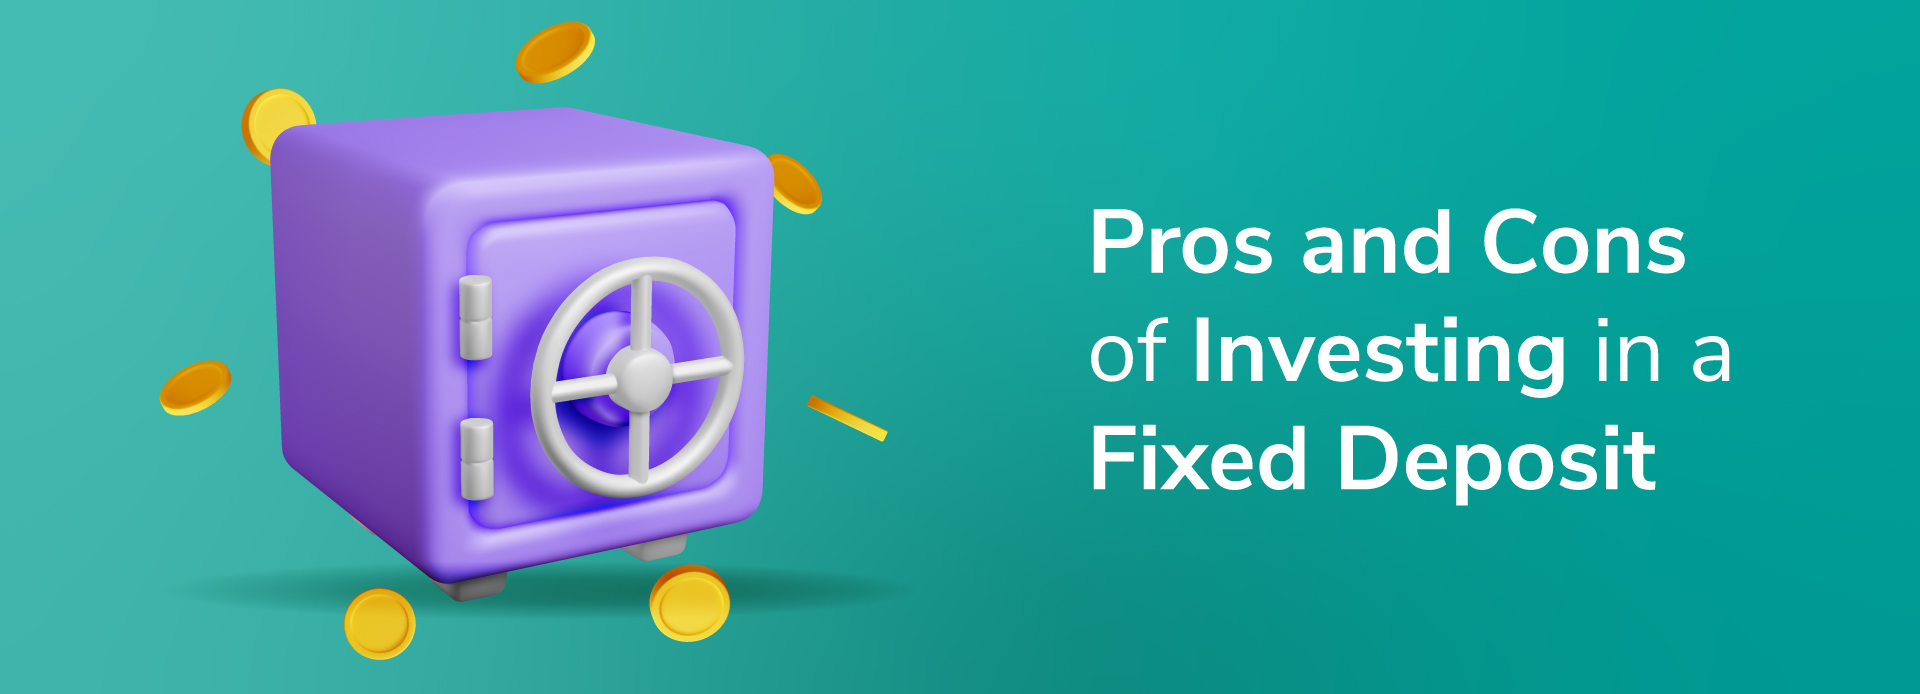 Pros and Cons of Investing in Fixed Deposits